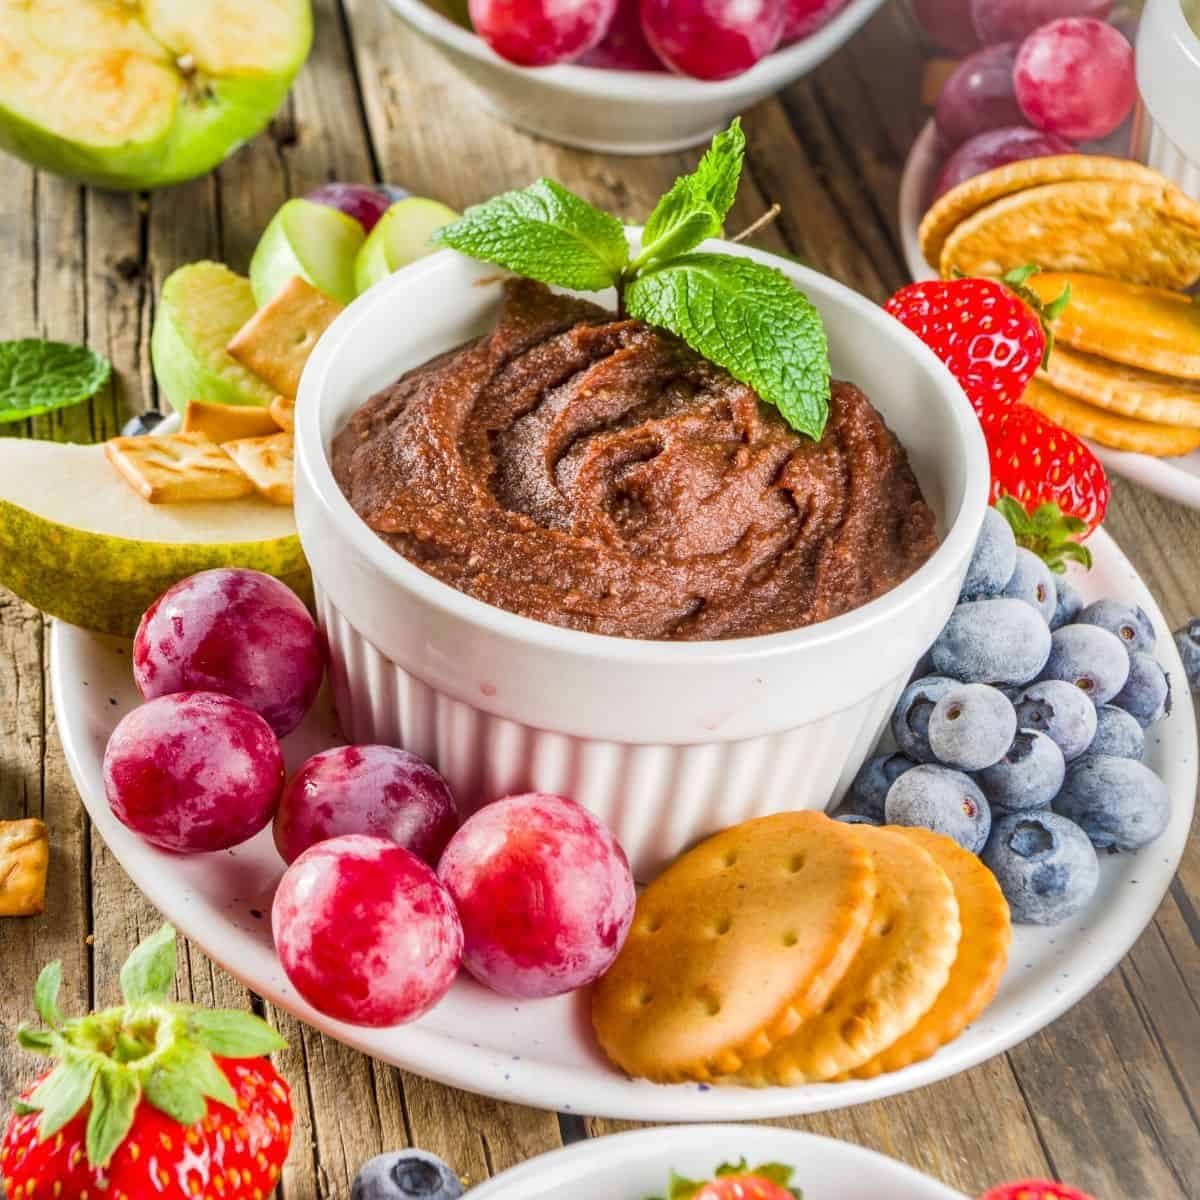 How to make chocolate hummus (with surprise ingredient)